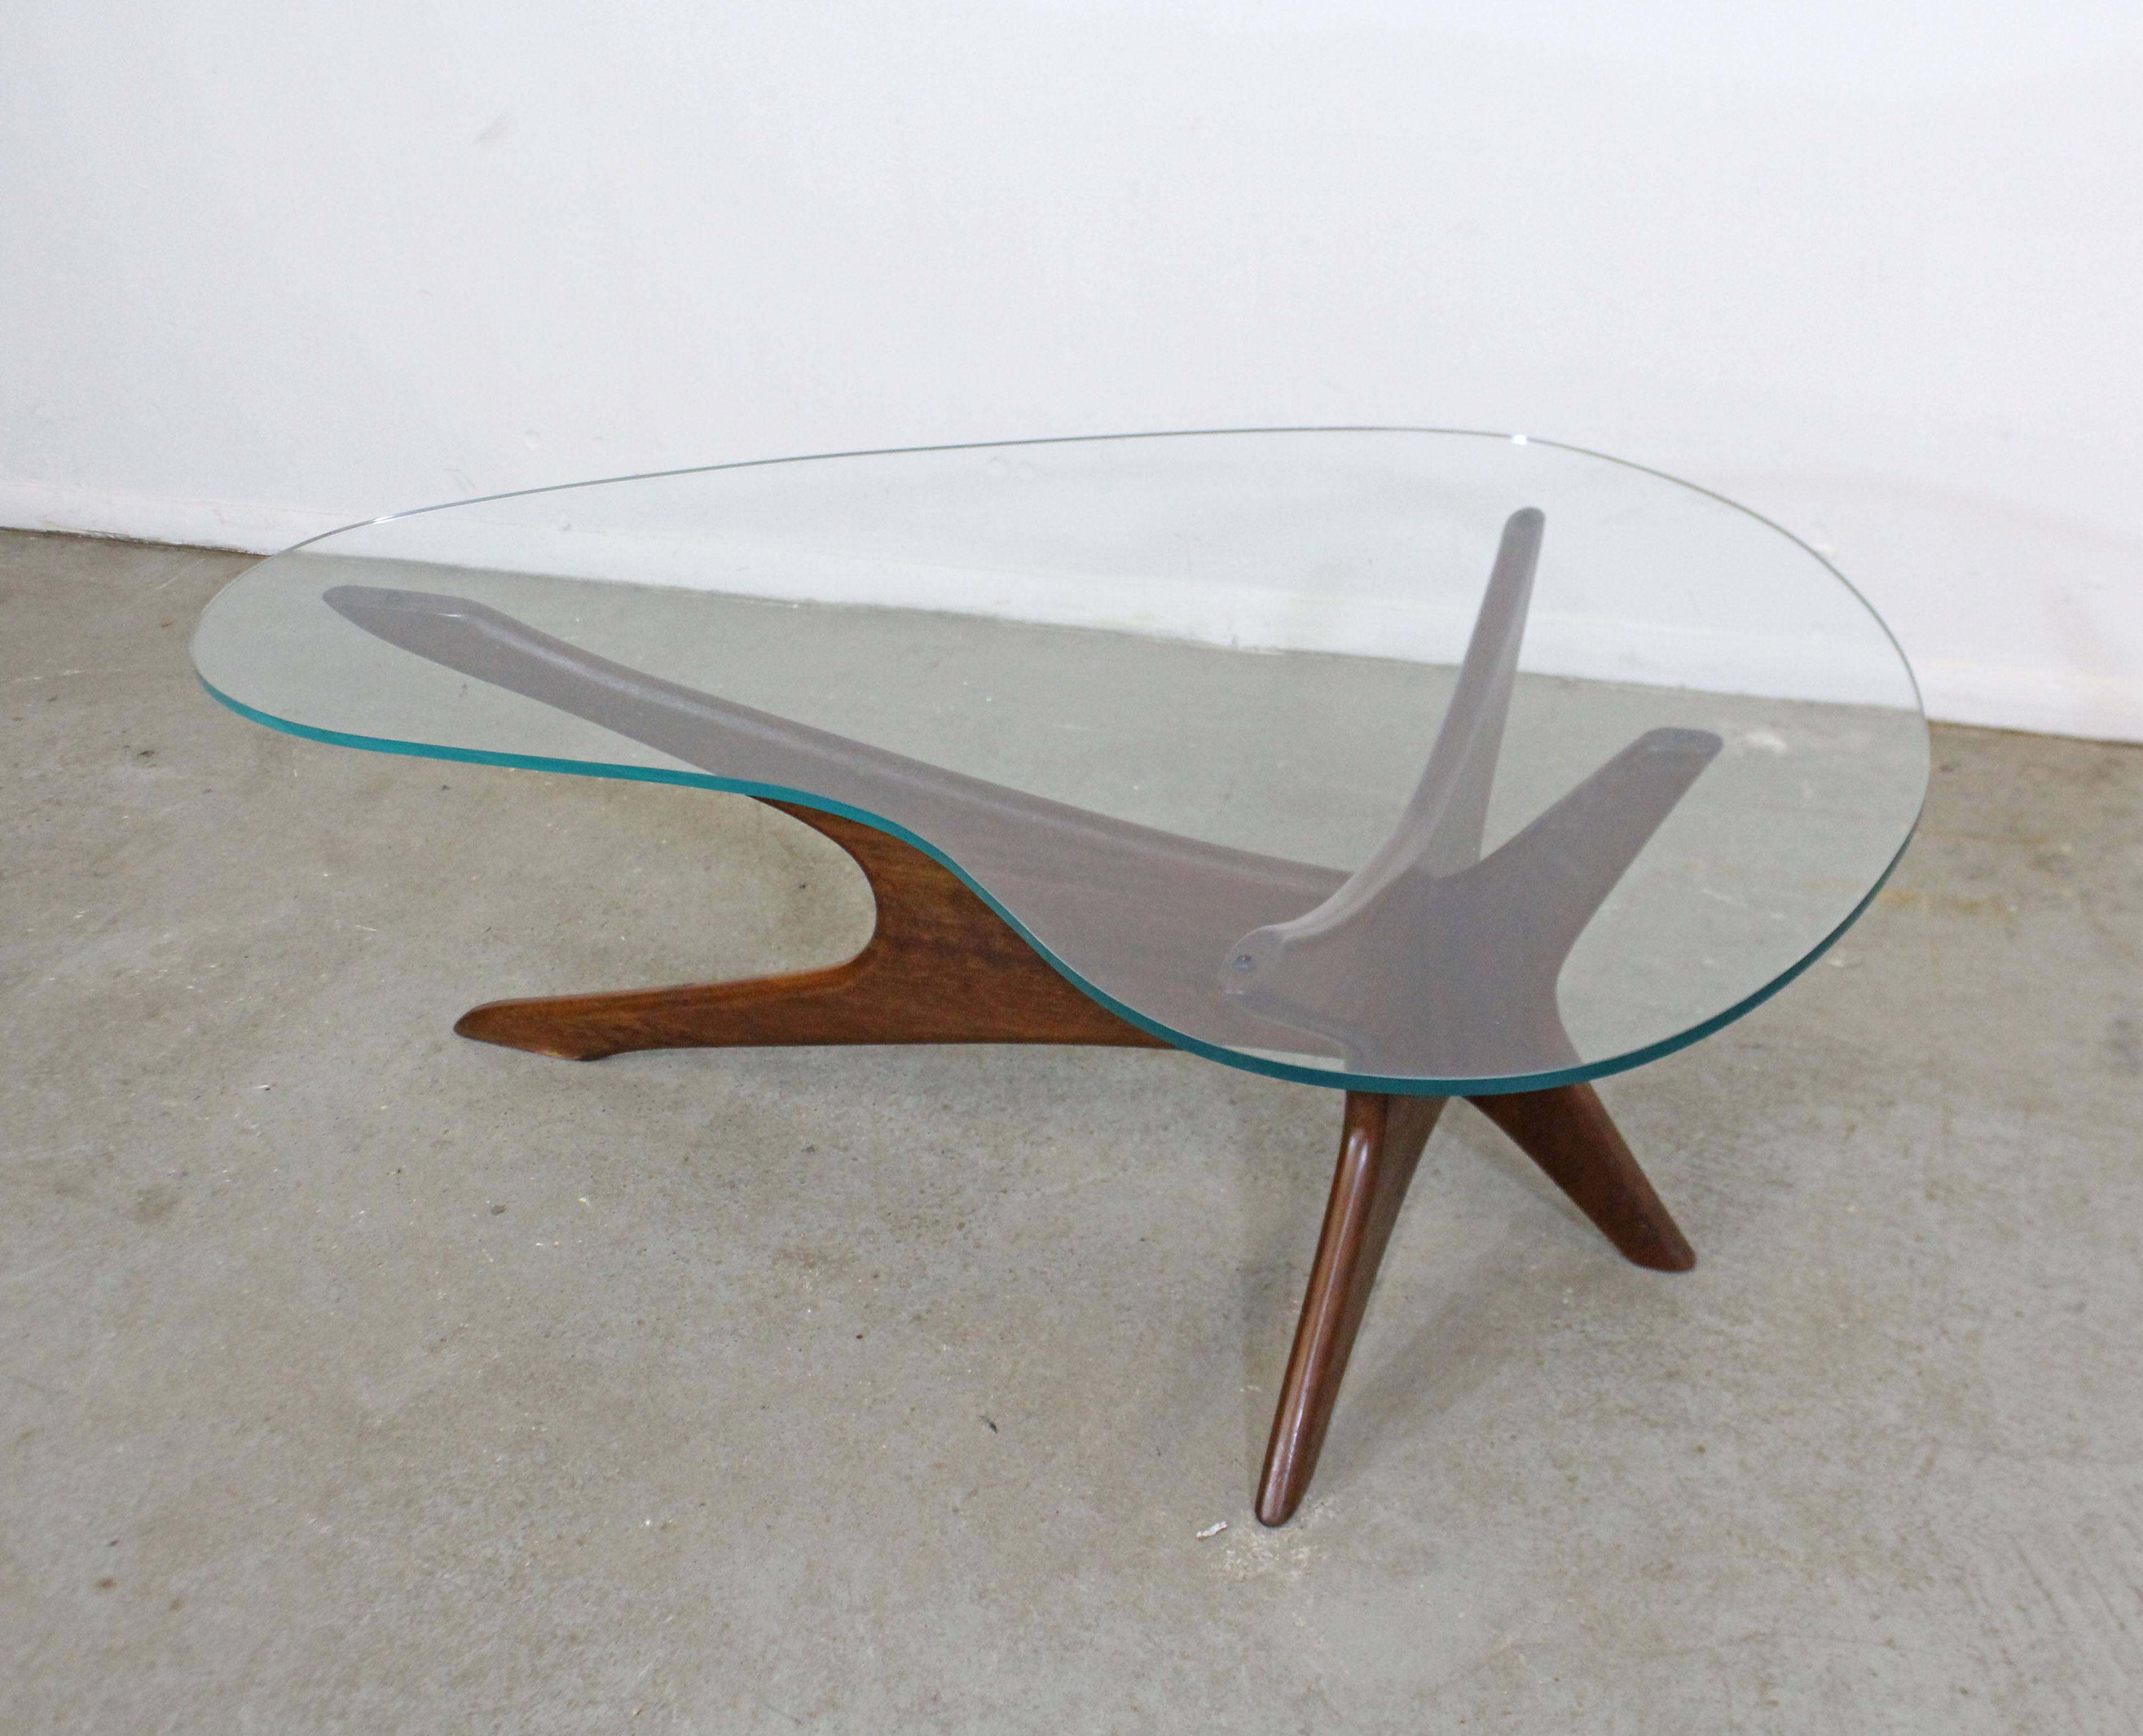 American Mid-Century Modern Adrian Pearsall Kidney Walnut and Glass Coffee Table